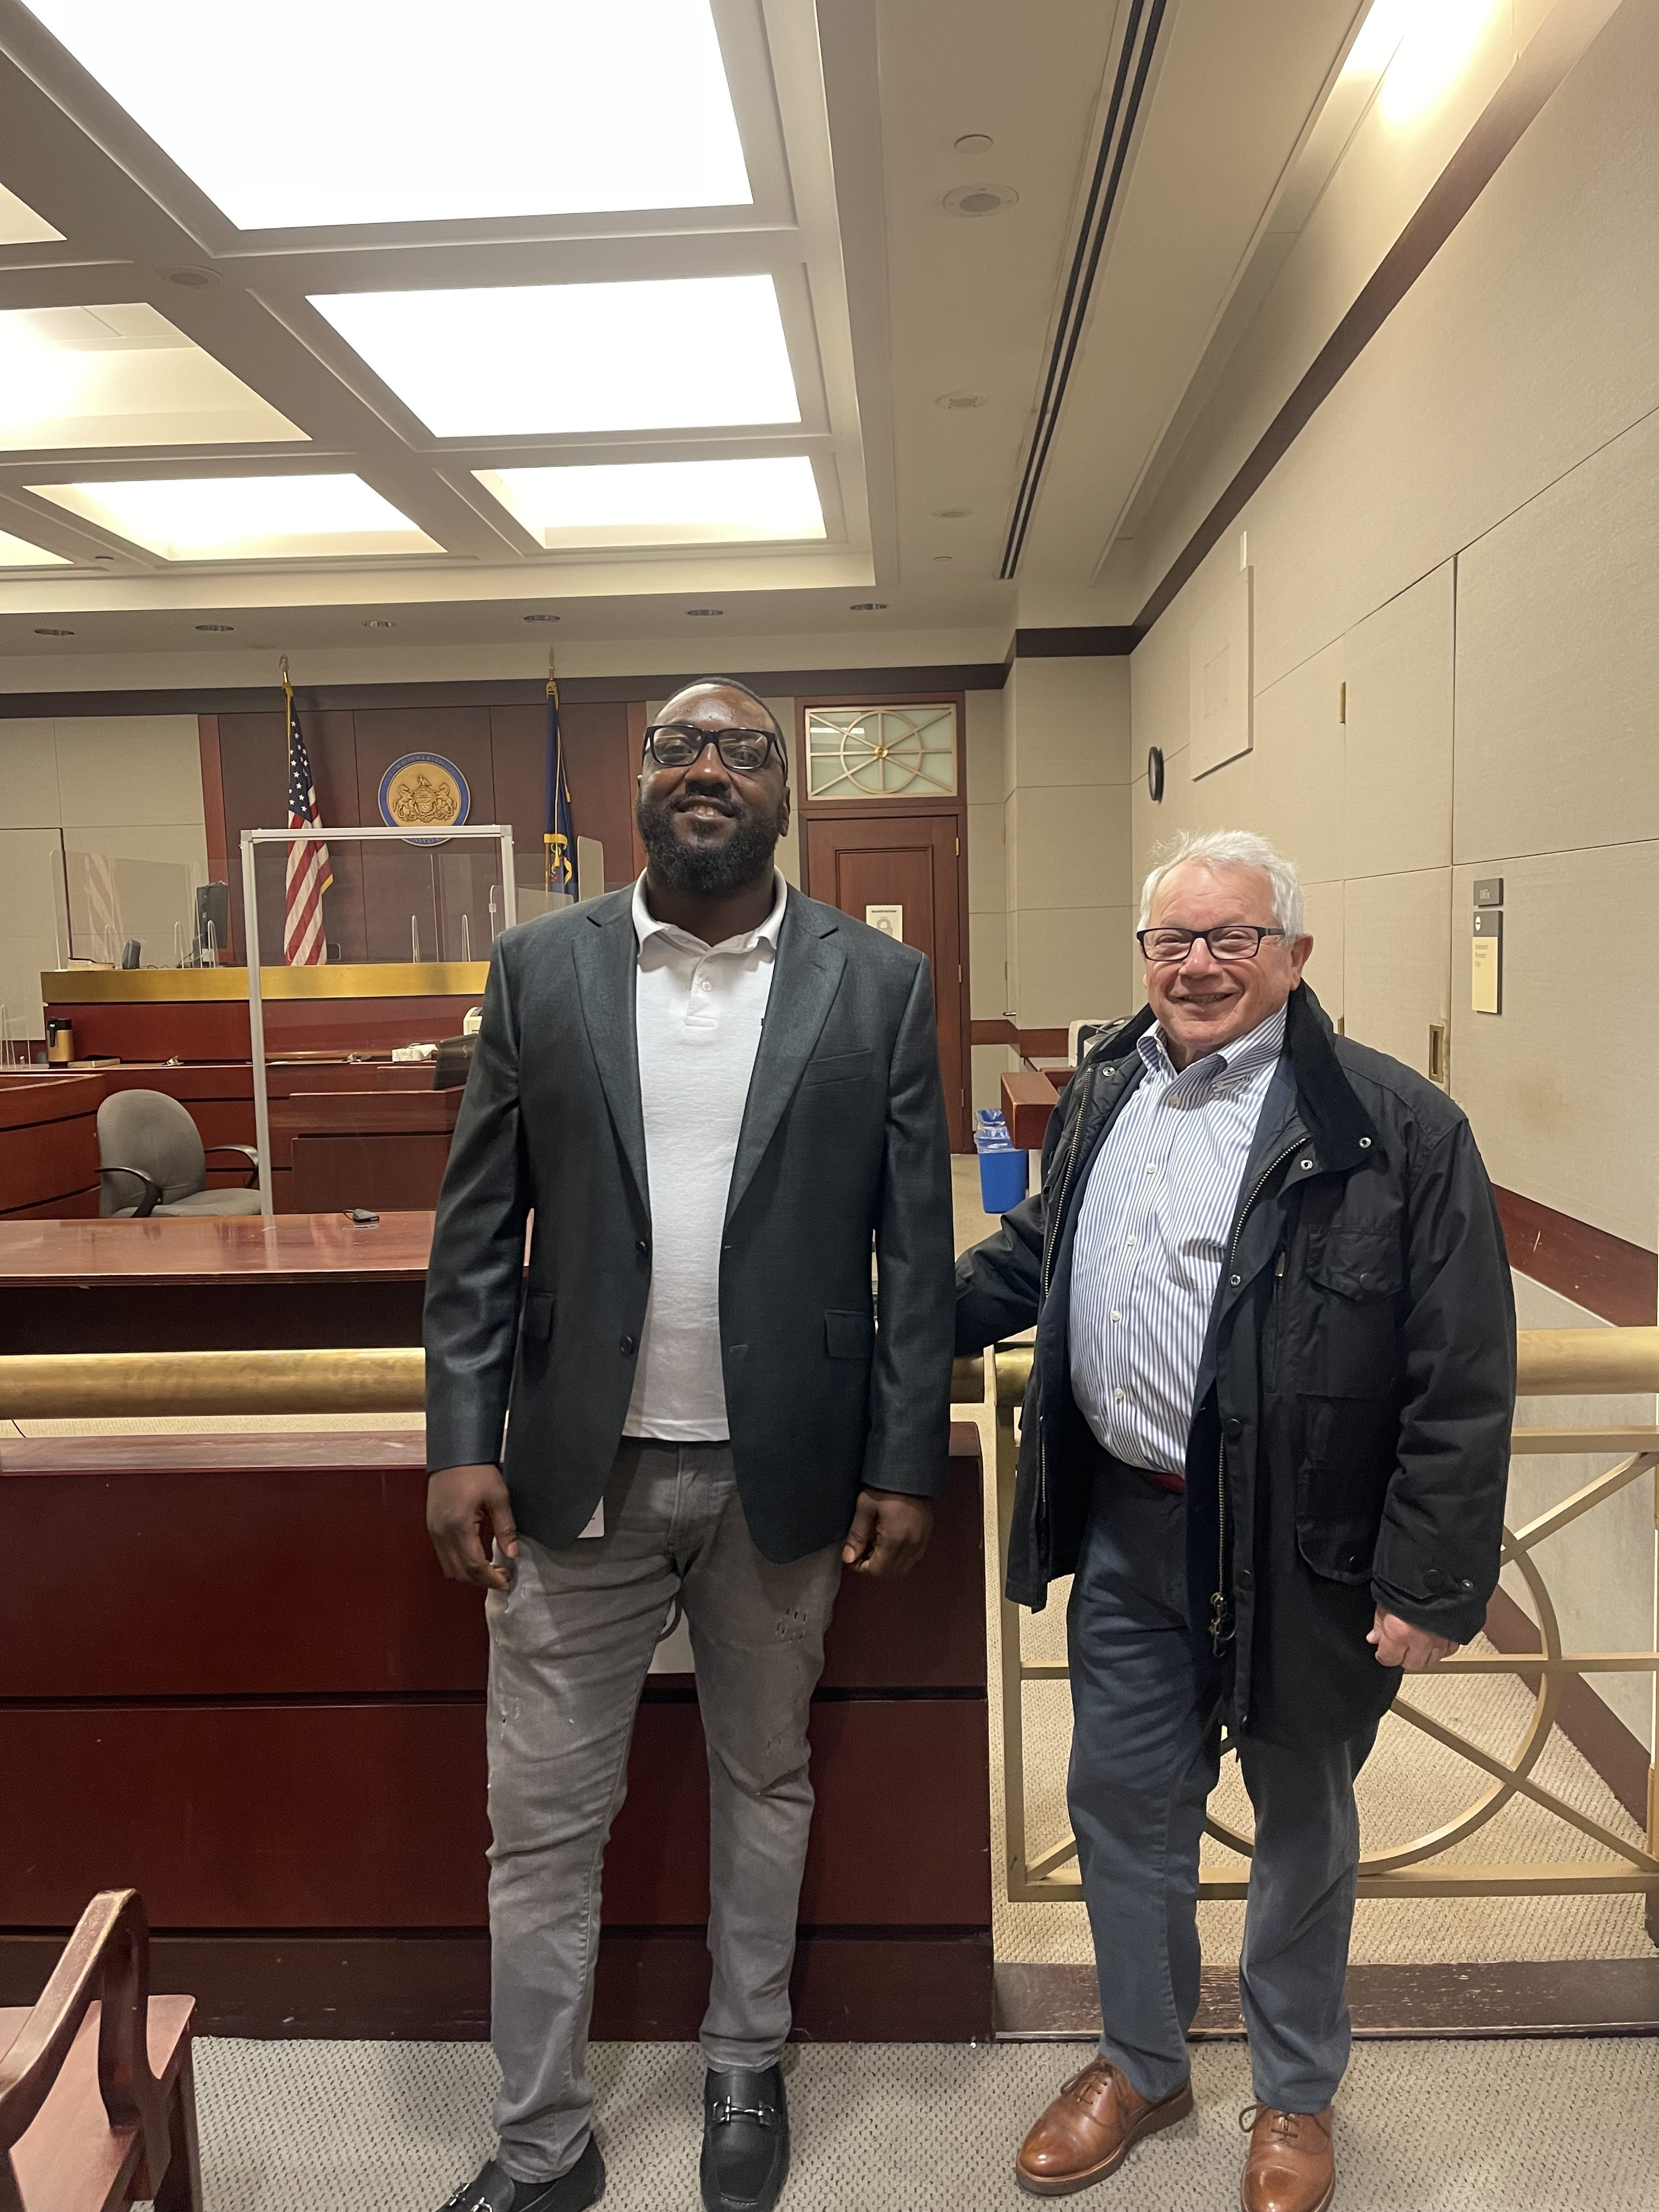 Formerly incarcerated man and the judge who sentenced him collaborate to help at-risk youth